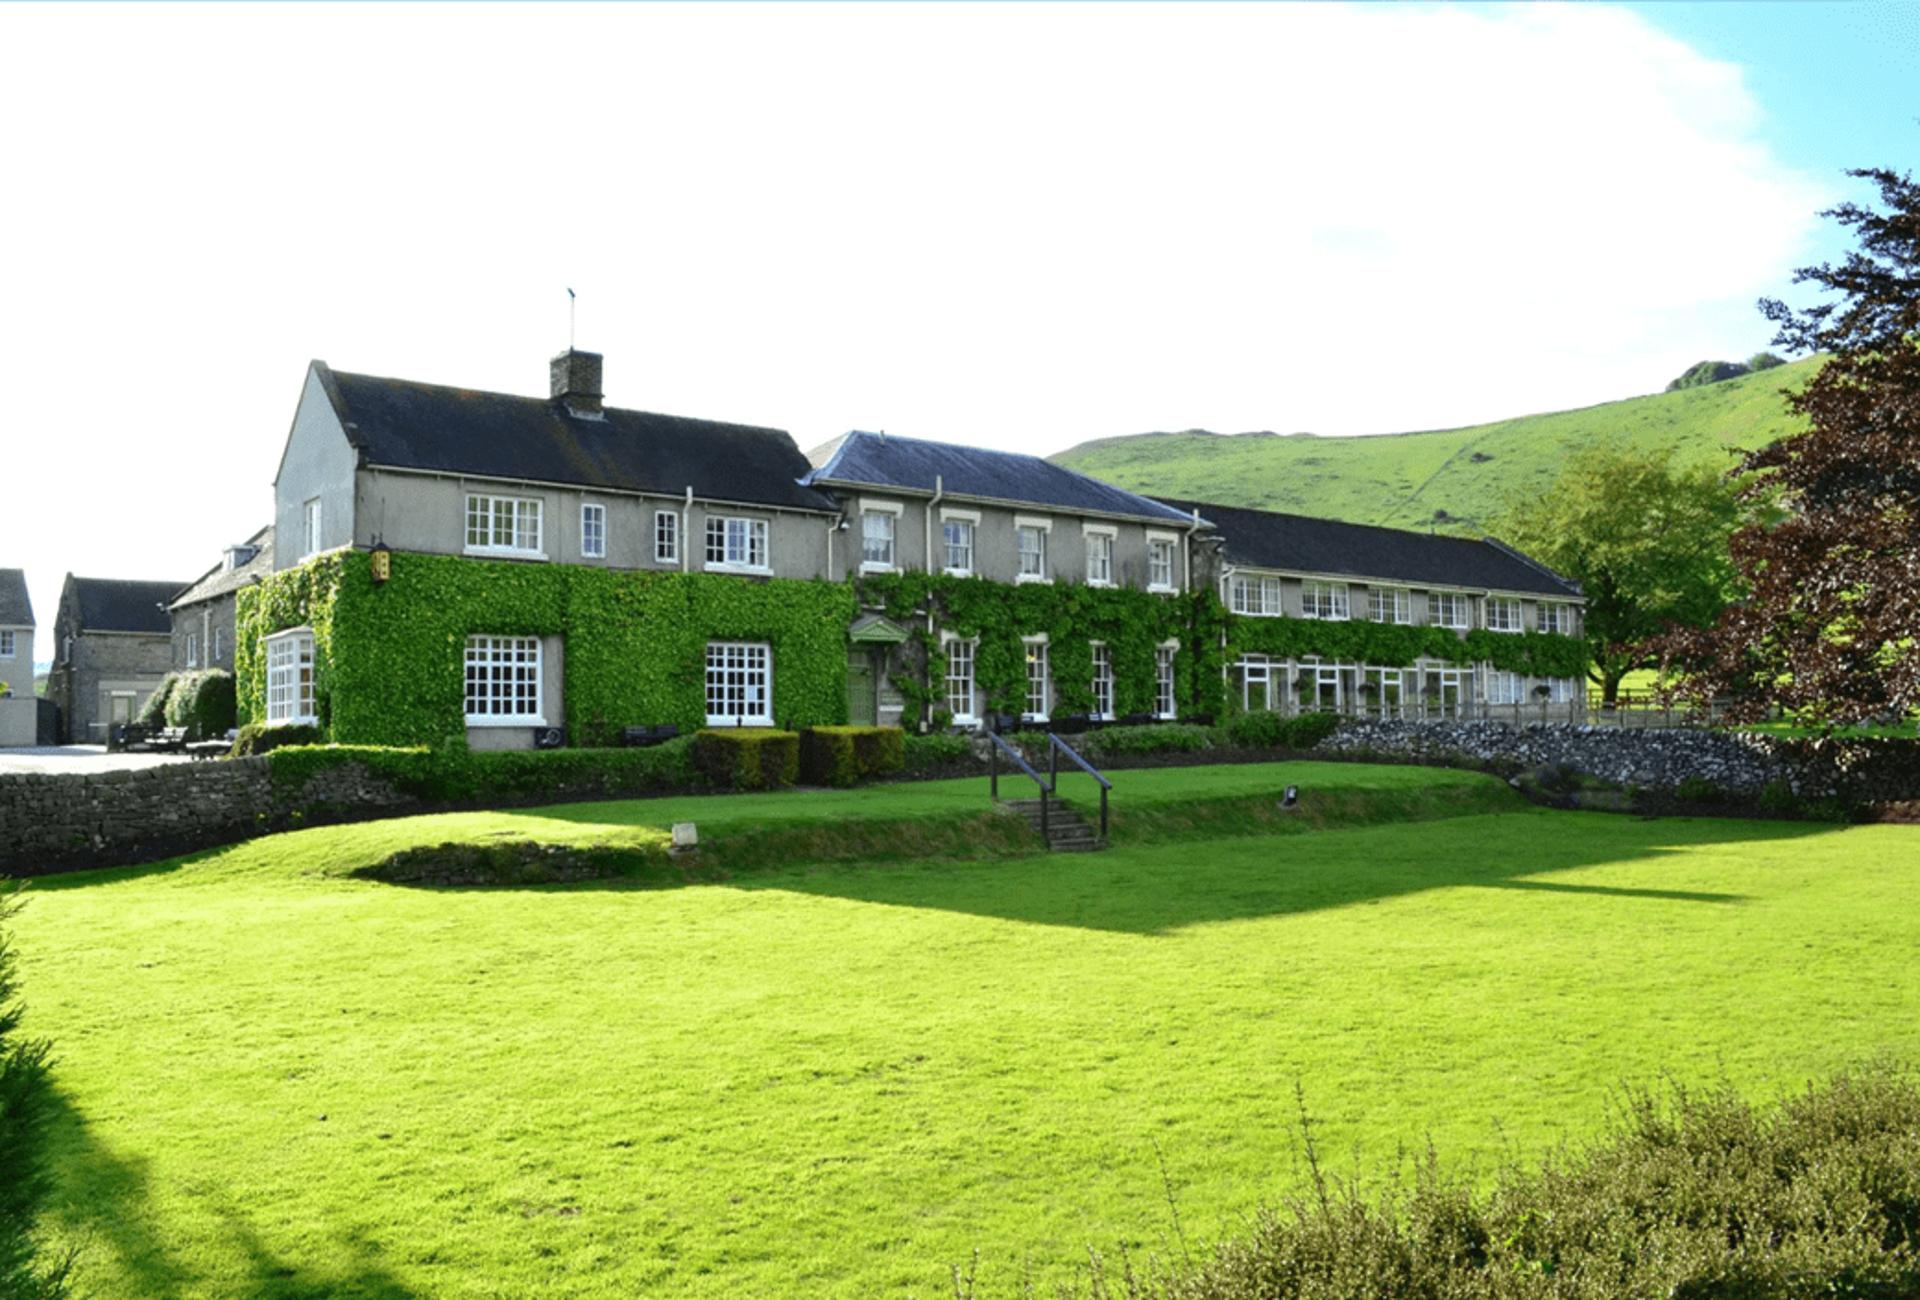 Peak District hotel up for sale for £2.35m